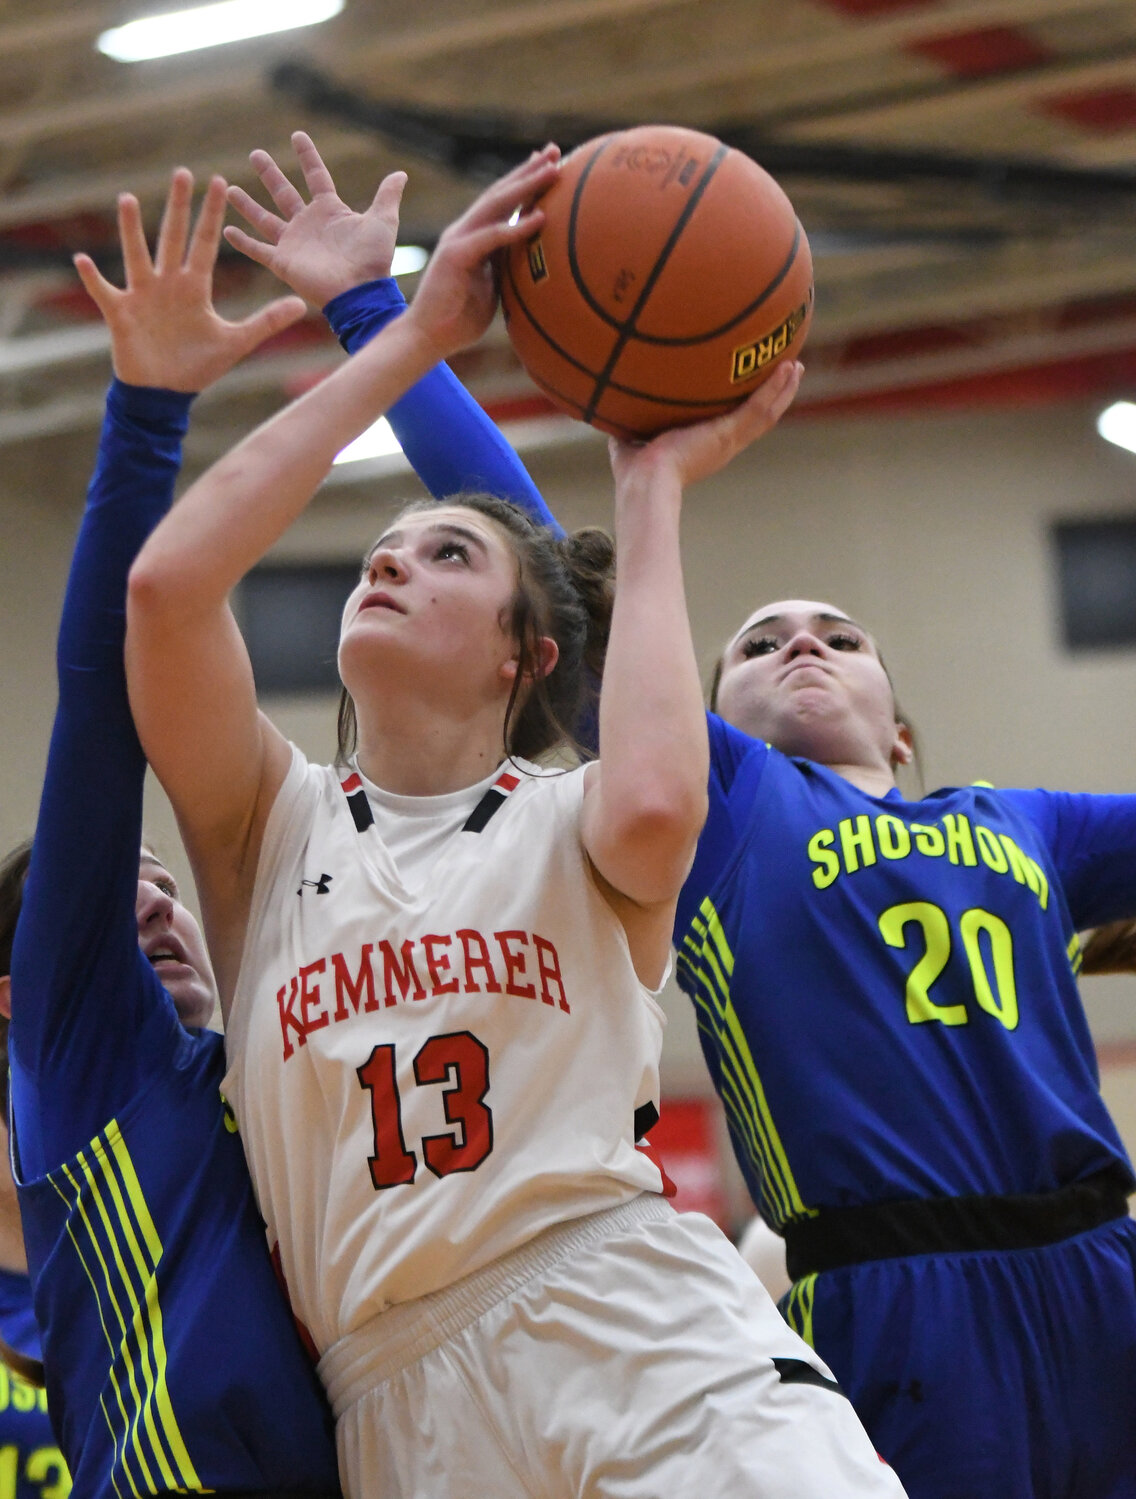 Lady Ranger junior Jane Skidmore was named to the 2A All-State and 2A Southwest All-Conference teams for her play during the 2023-24 season. Skidmore led the 2A West in scoring, with 13.5 points per game.